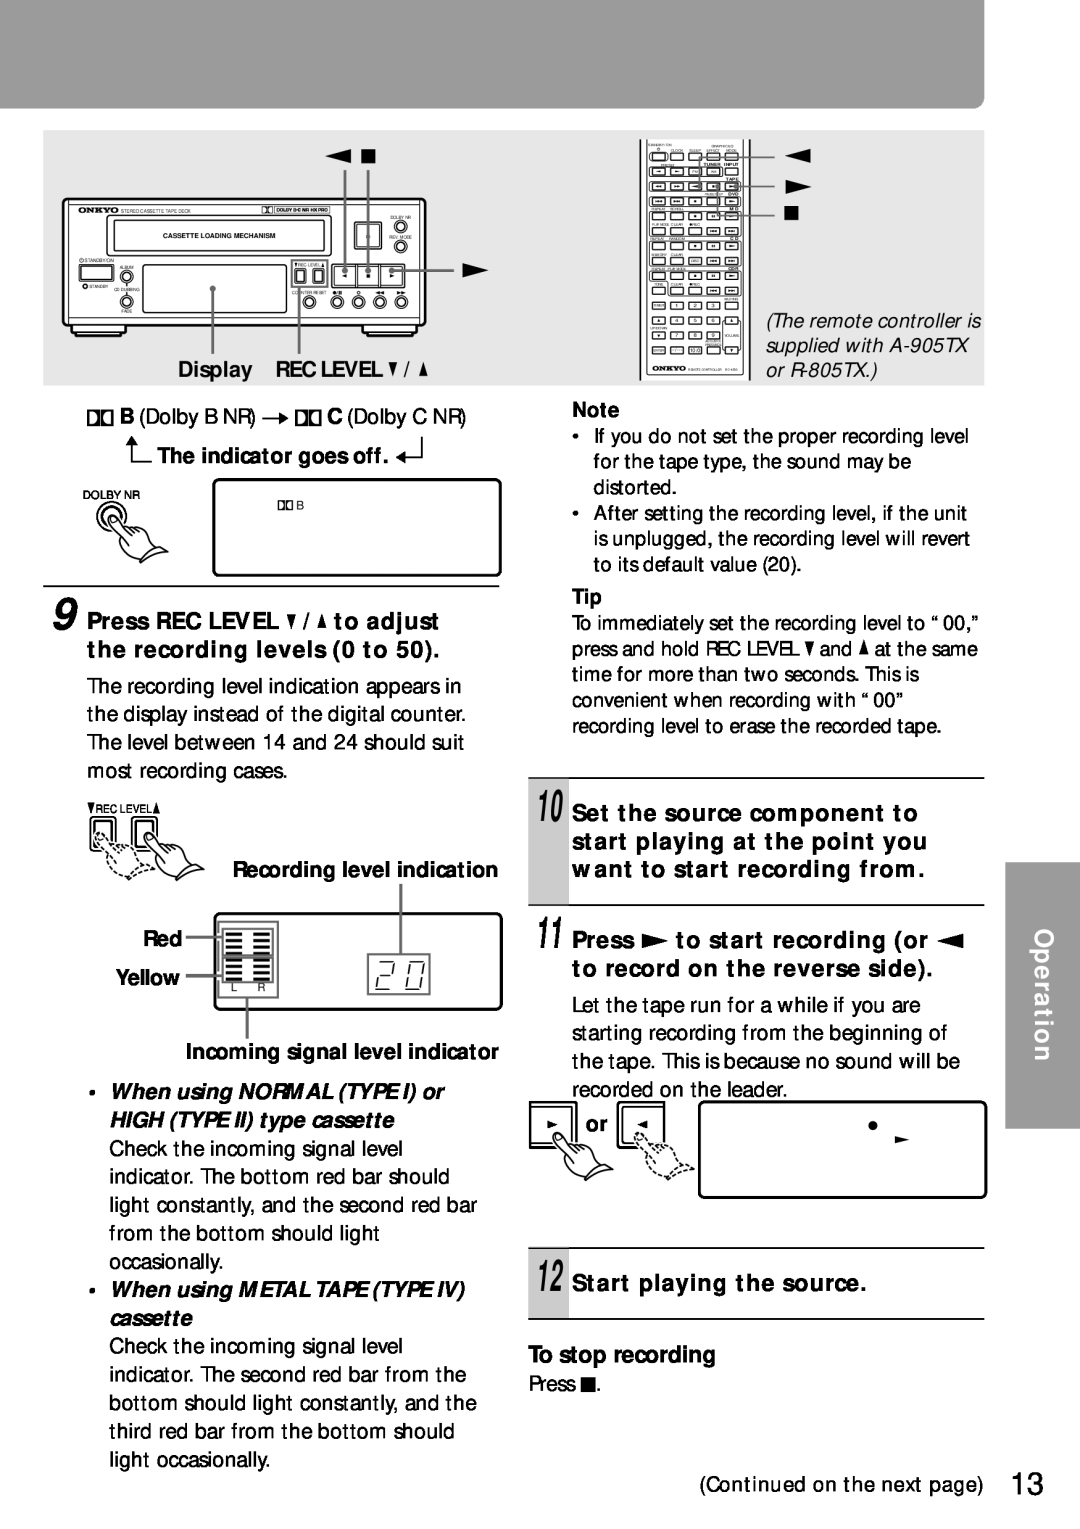 Onkyo K-505TX instruction manual Start playing the source To stop recording 